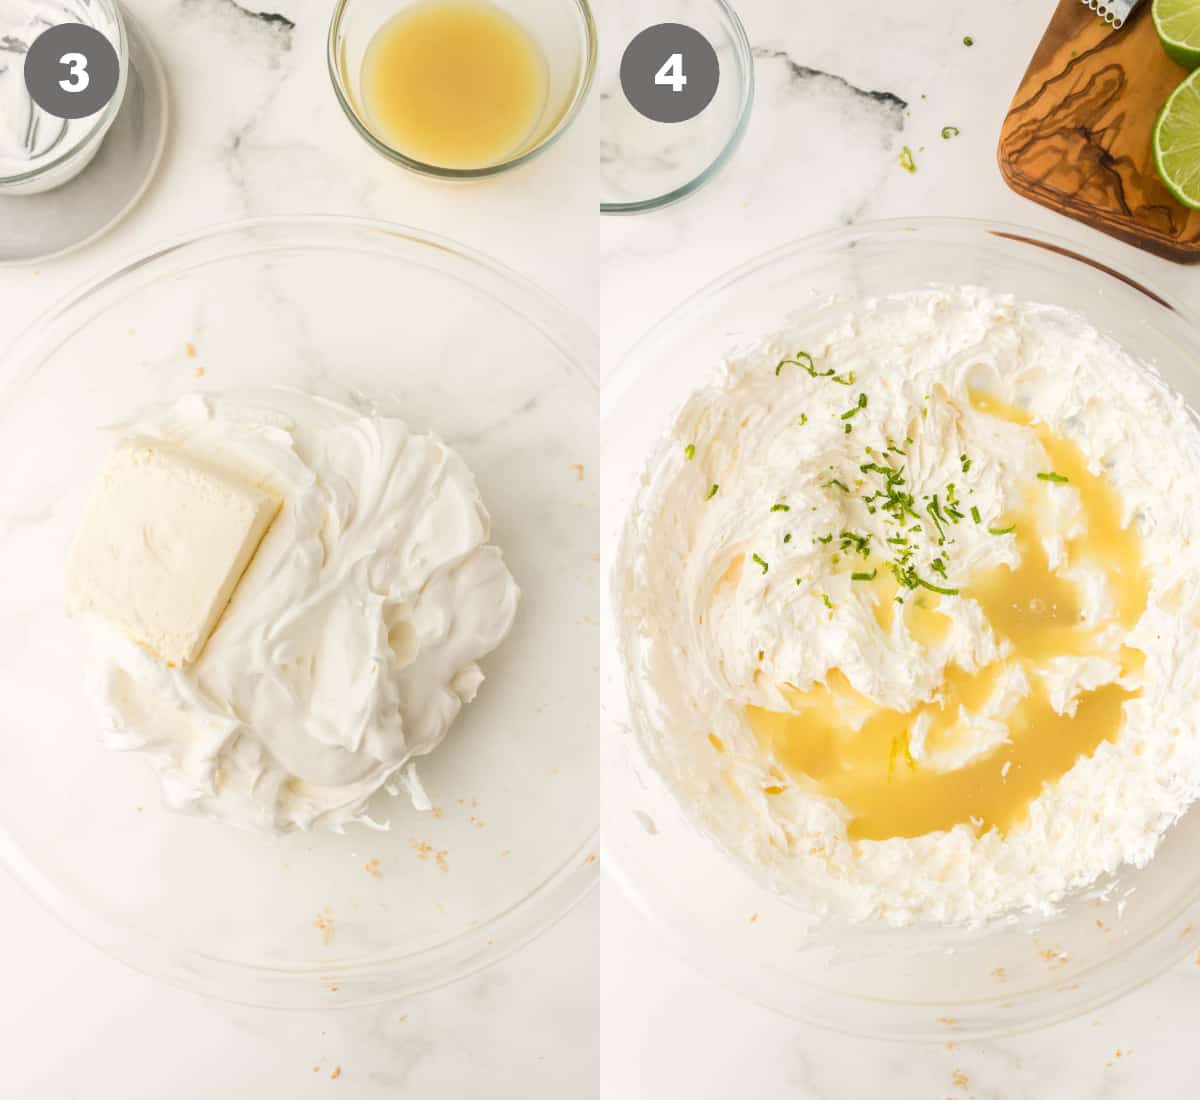 Cream cheese and whipped cream in a bowl and mixed together with lime juice added.